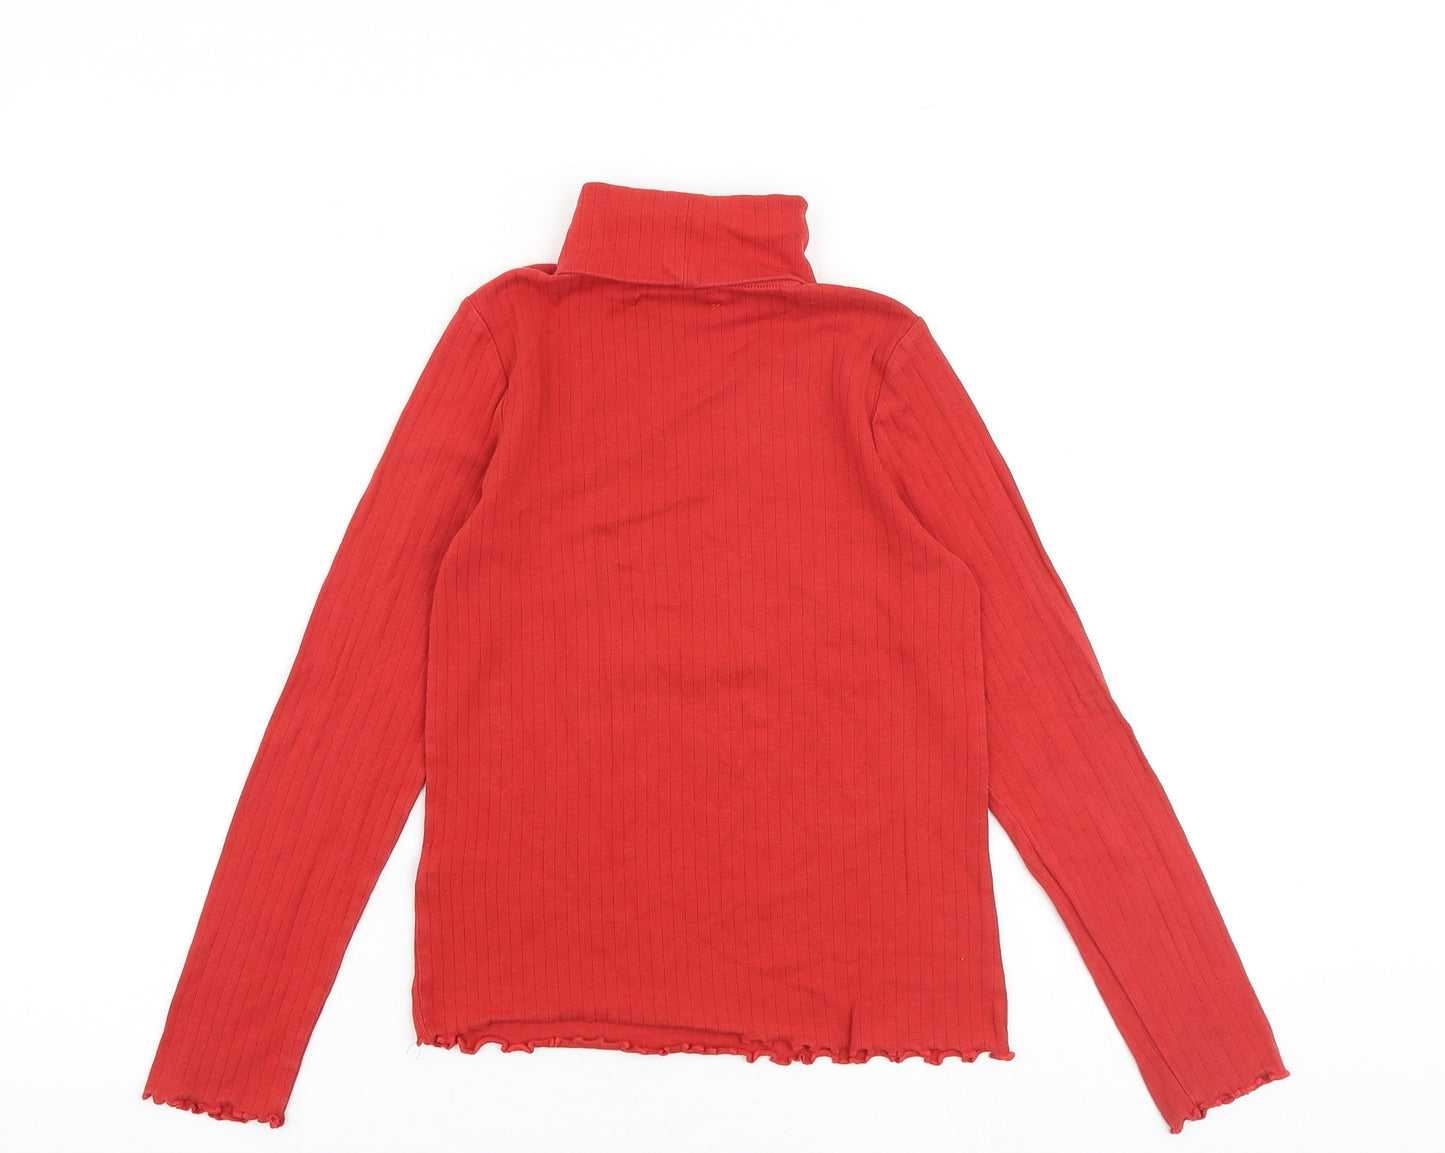 Marks and Spencer Girls Red Cotton Basic T-Shirt Size 11-12 Years Roll Neck Pullover